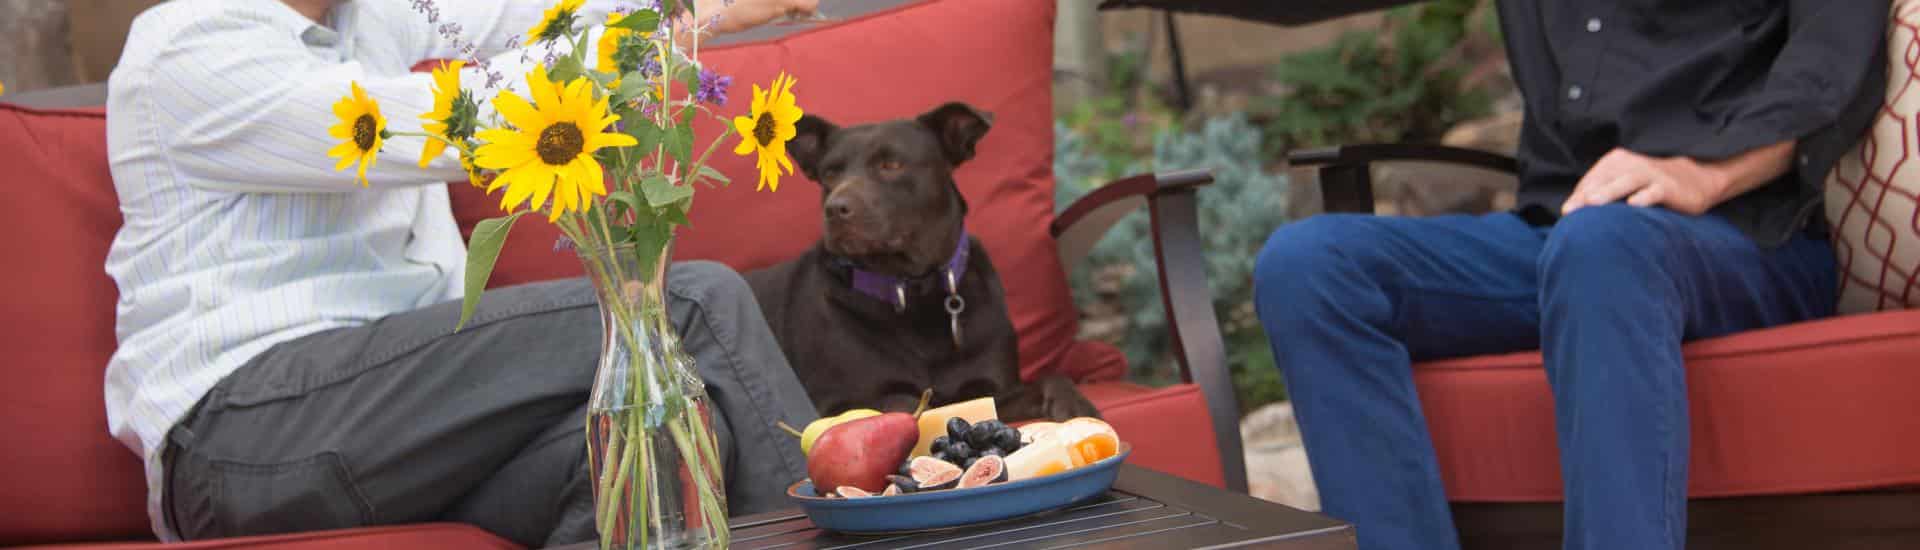 Dark brown dog sitting on red cushioned patio furniture with vase of yellow and purple flowers and plate of fruit and cheese on dark coffee table